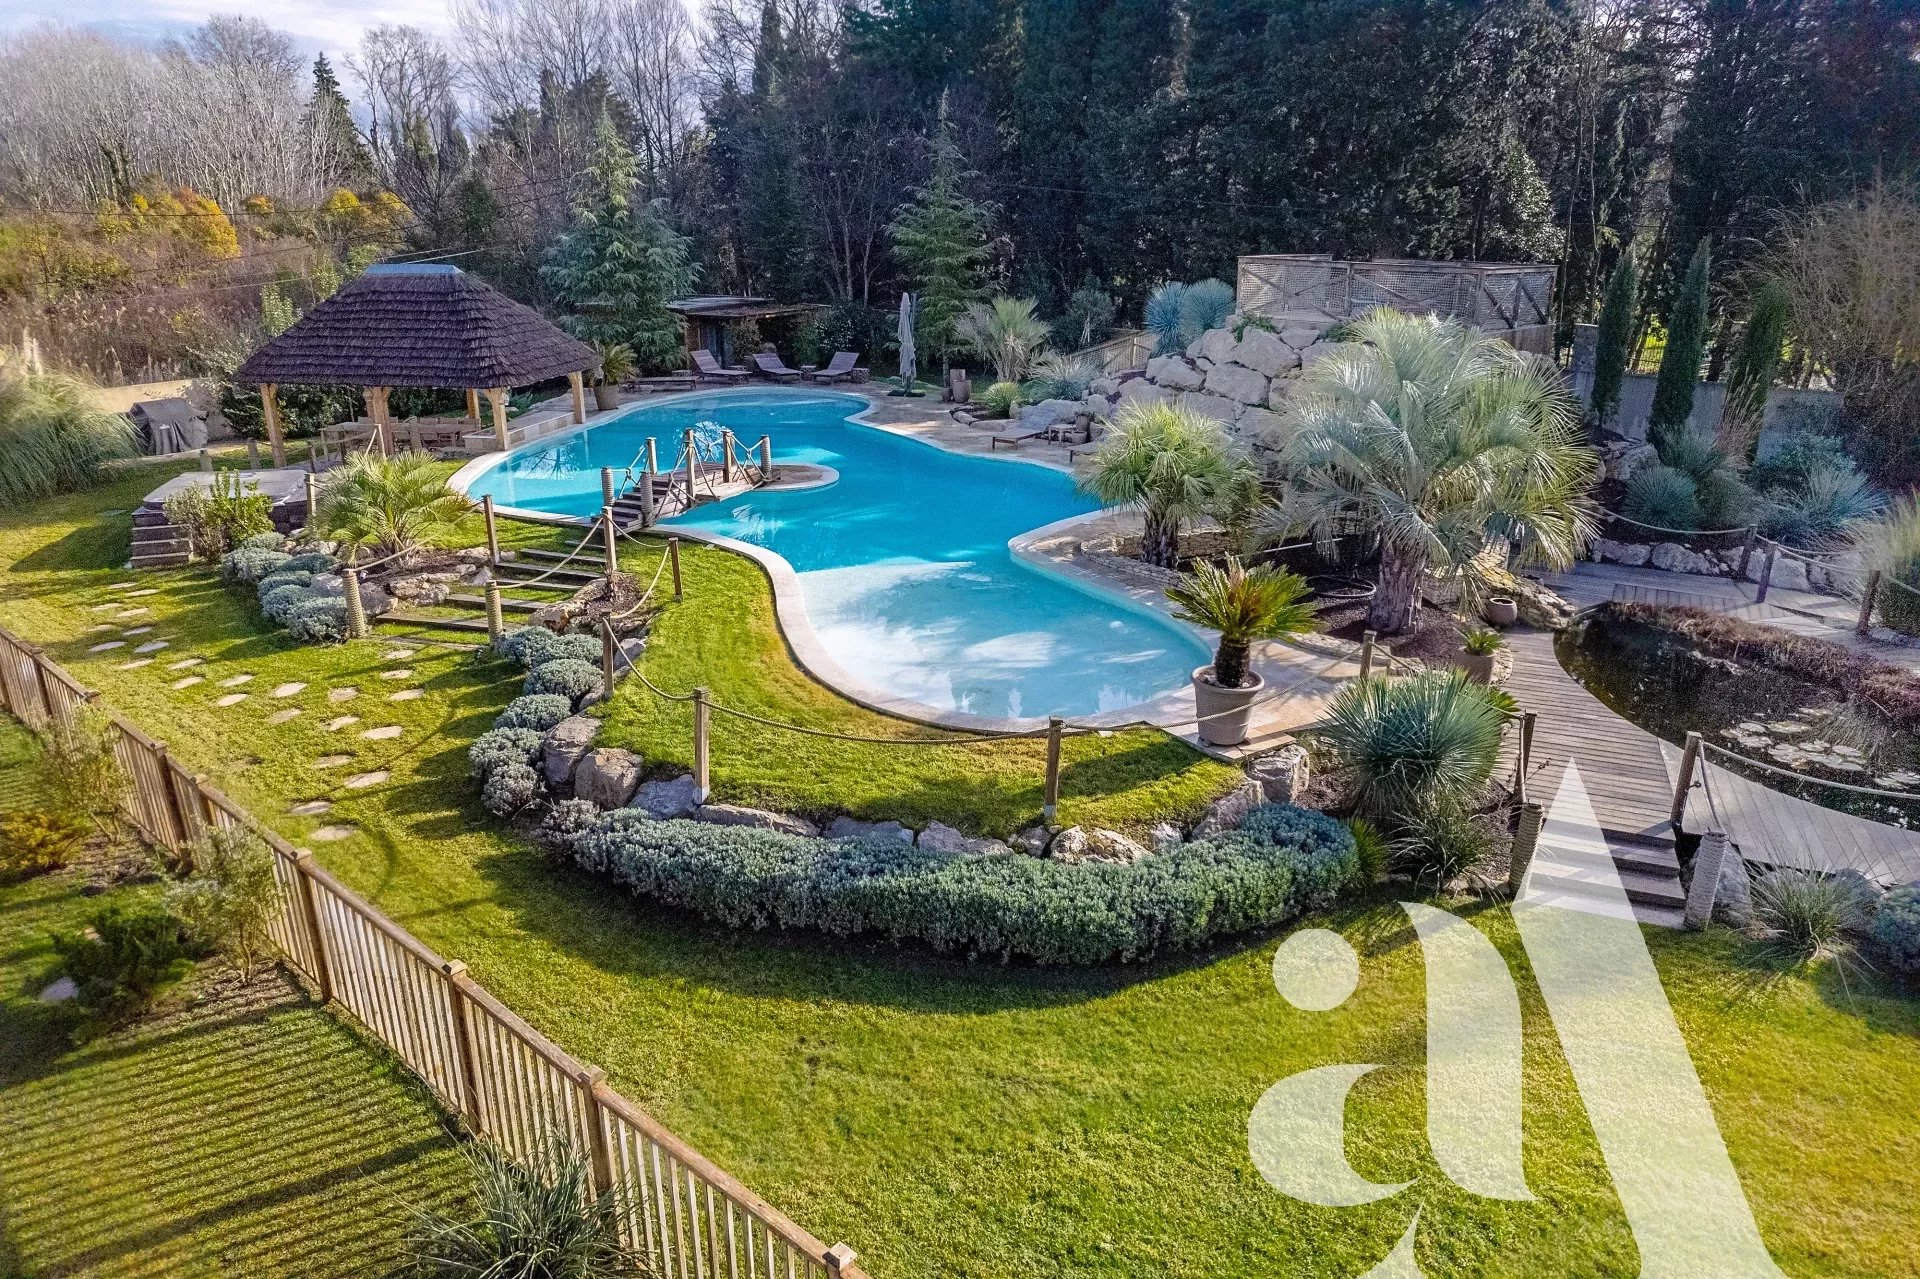 HOUSE WITH POOL AND VIEW ON THE ALPILLES - NEAR EYGALIÈRES